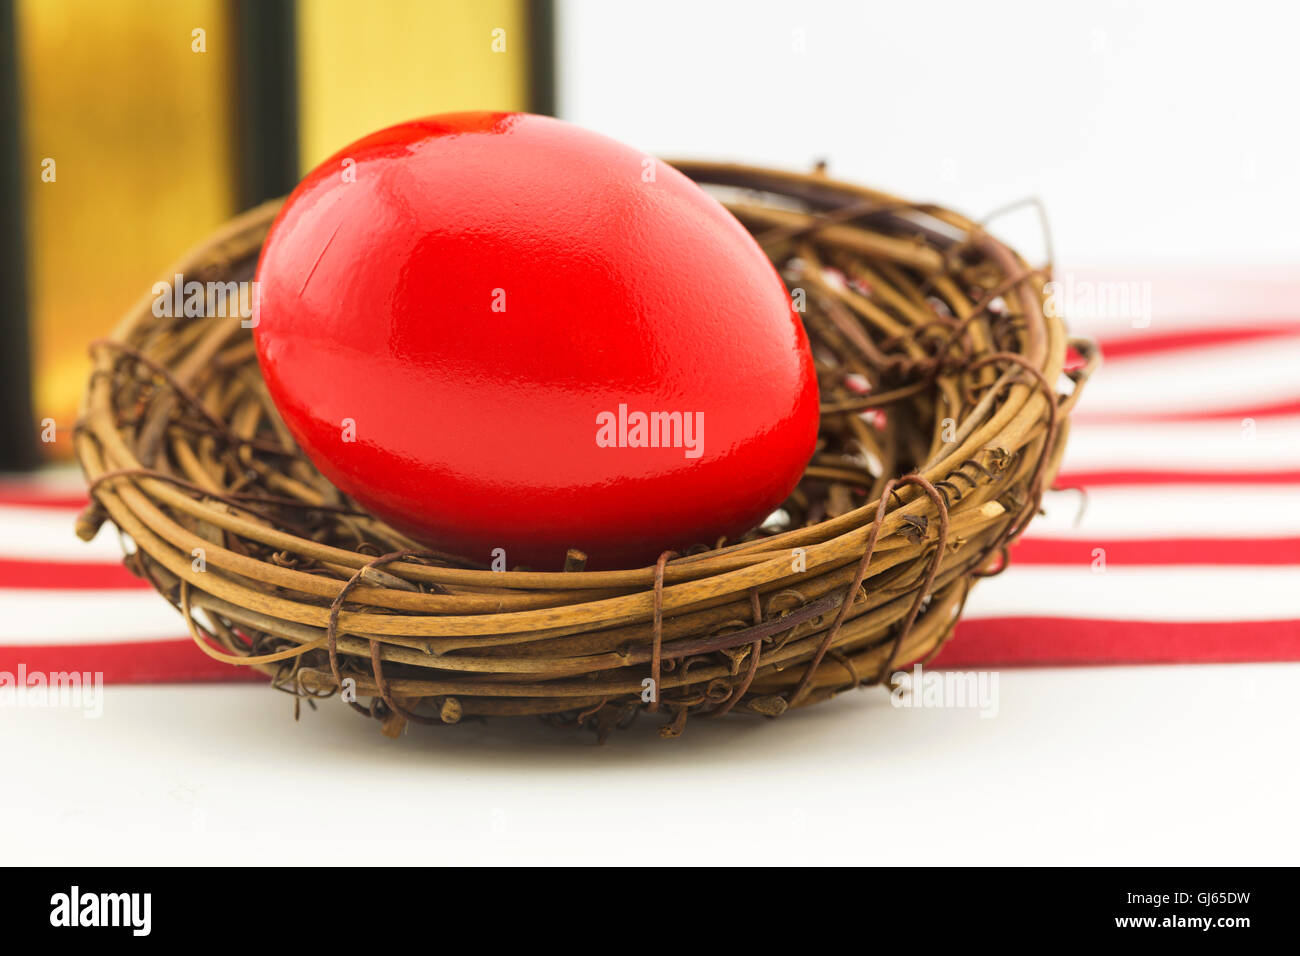 Red nest egg in front of books and red and white stripes of American flag. Stock Photo